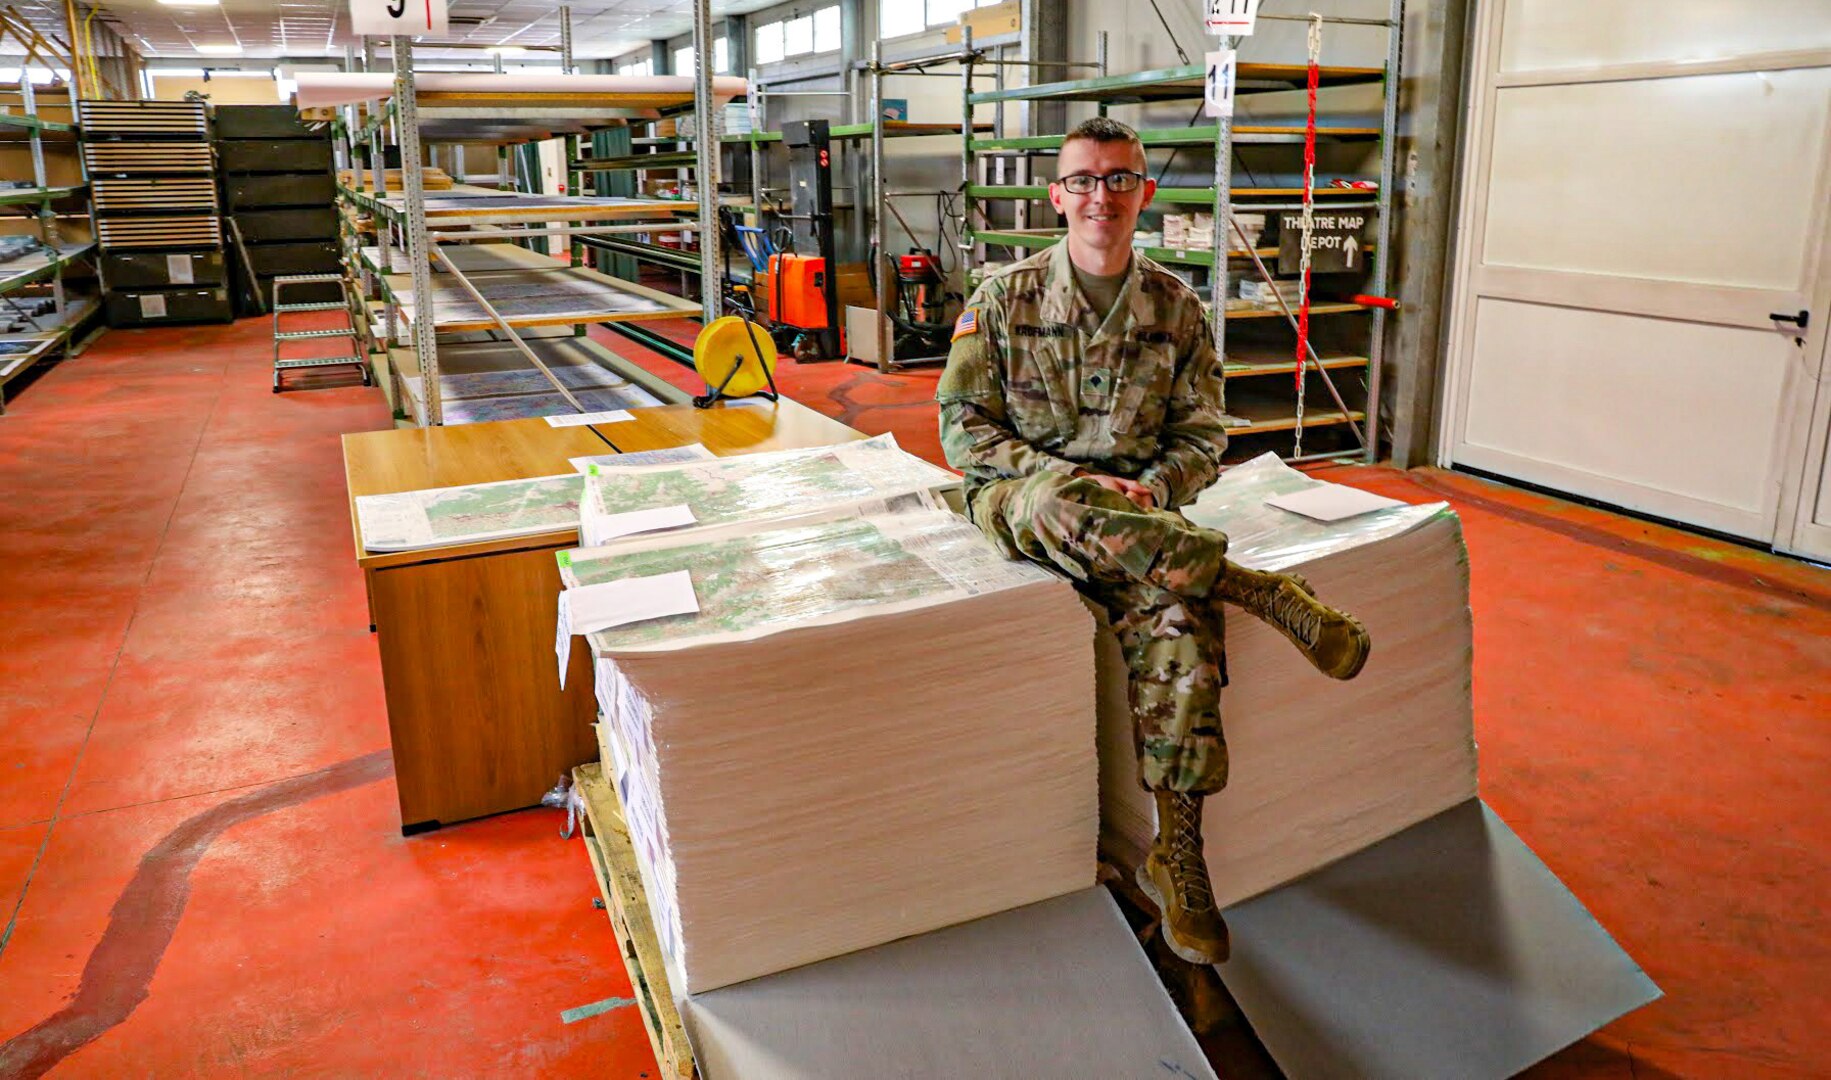 Spc. Caleb Kaufmann, a geospatial engineer Soldier with the 41st Infantry Brigade Combat Team, Oregon National Guard, deployed to the KFOR Regional Command East mission sits on a stack of maps in the map depot Sept. 1, 2020, at Camp Film City, Pristina/Prishtina Kosovo. Kaufmann was the sole continuity between the outgoing Czech Republic NATO partners and incoming Austrian NATO partners in a warehouse with over 100,000 maps.